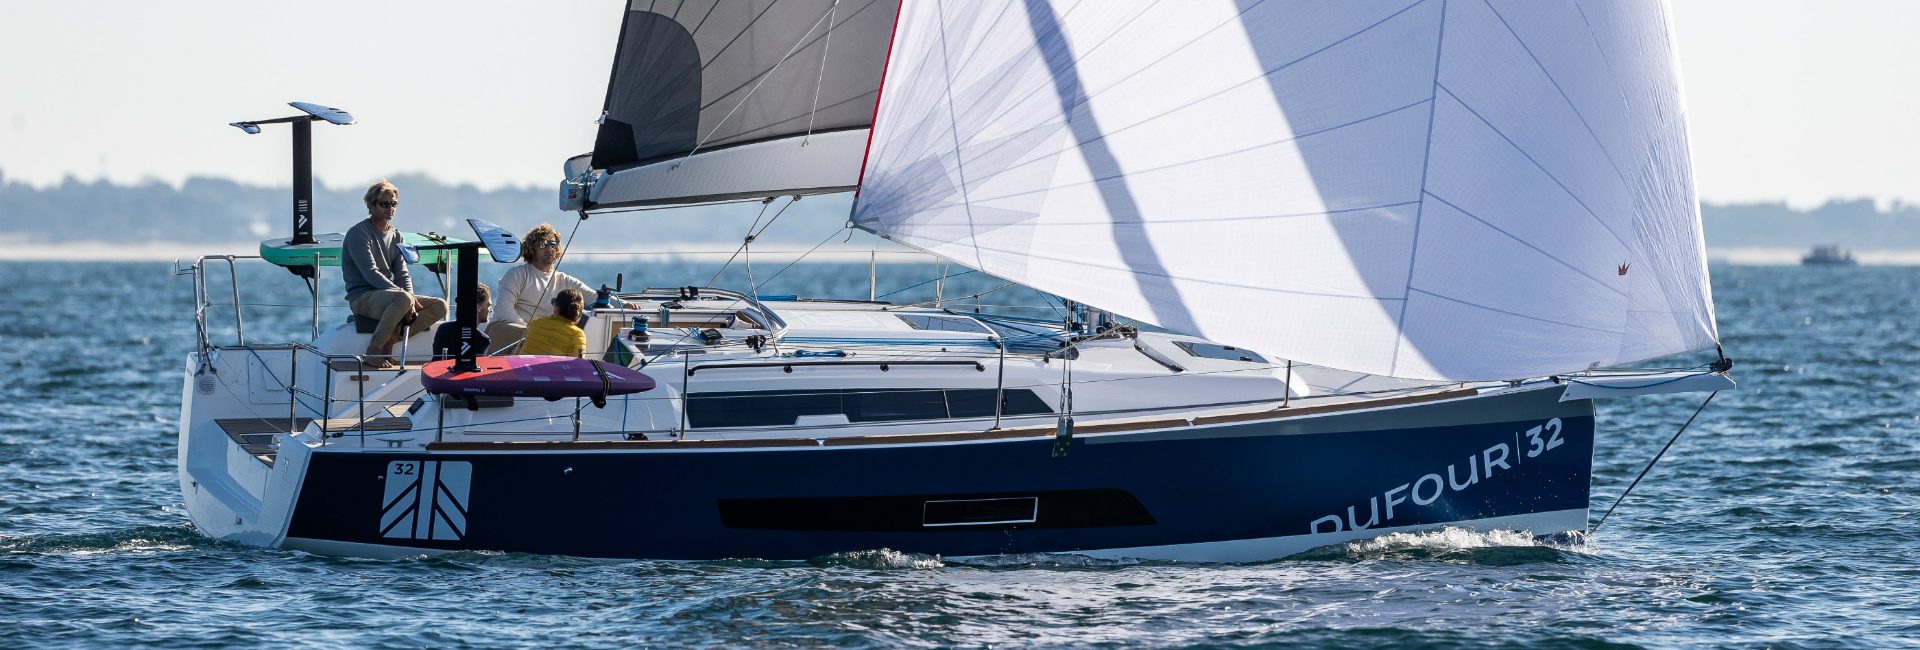 New Dufour 32  – For Sale <br> Available after the Southampton Boat Show